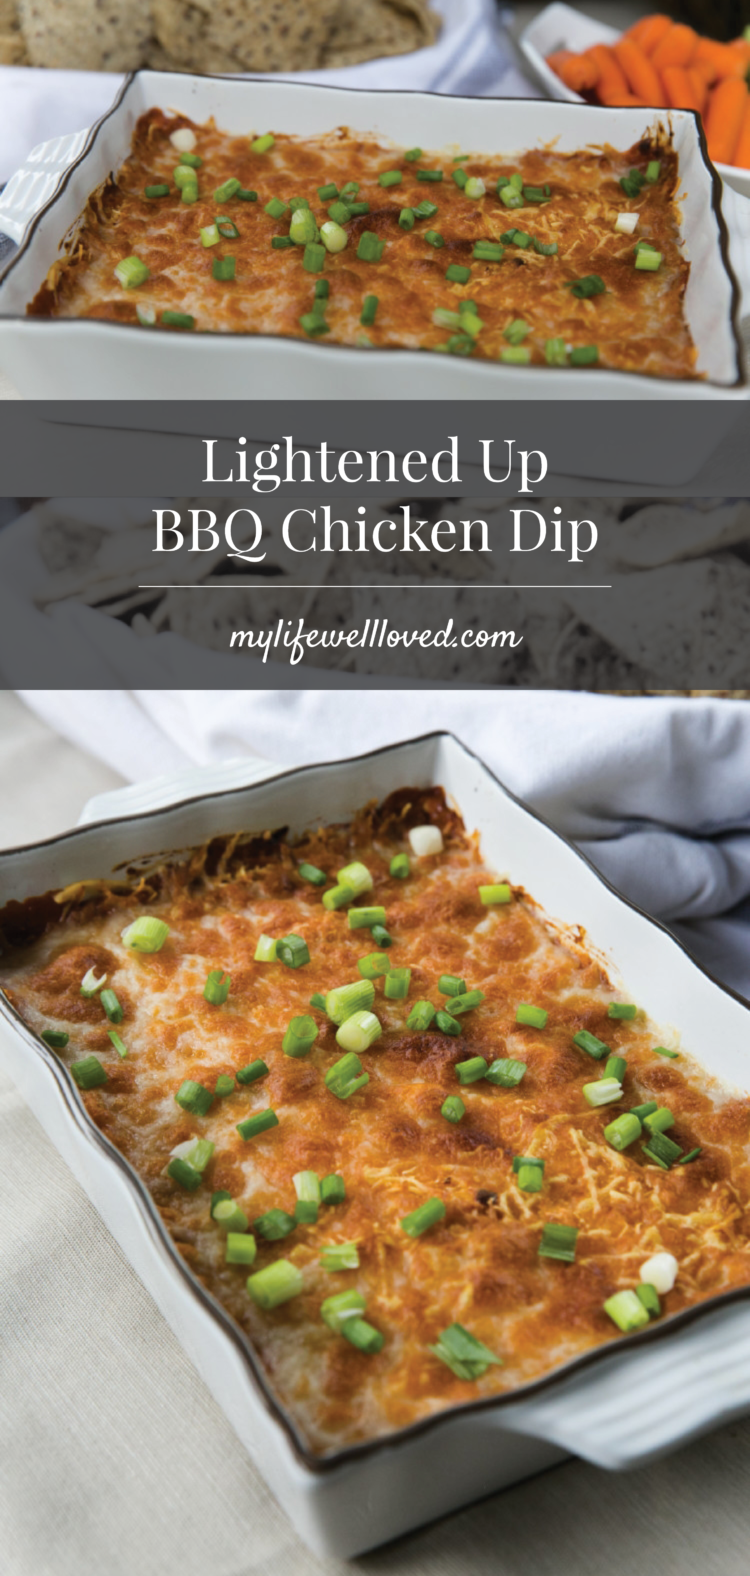 Delicious & Lightened Up BBQ Chicken Dip by Alabama health blogger My Life Well Loved // Football Tailgate recipe // Barbecue Chicken Dip Appetizer // Appetizer Recipe // Tailgating Set Up #tailgate #appetizer #healthyrecipe